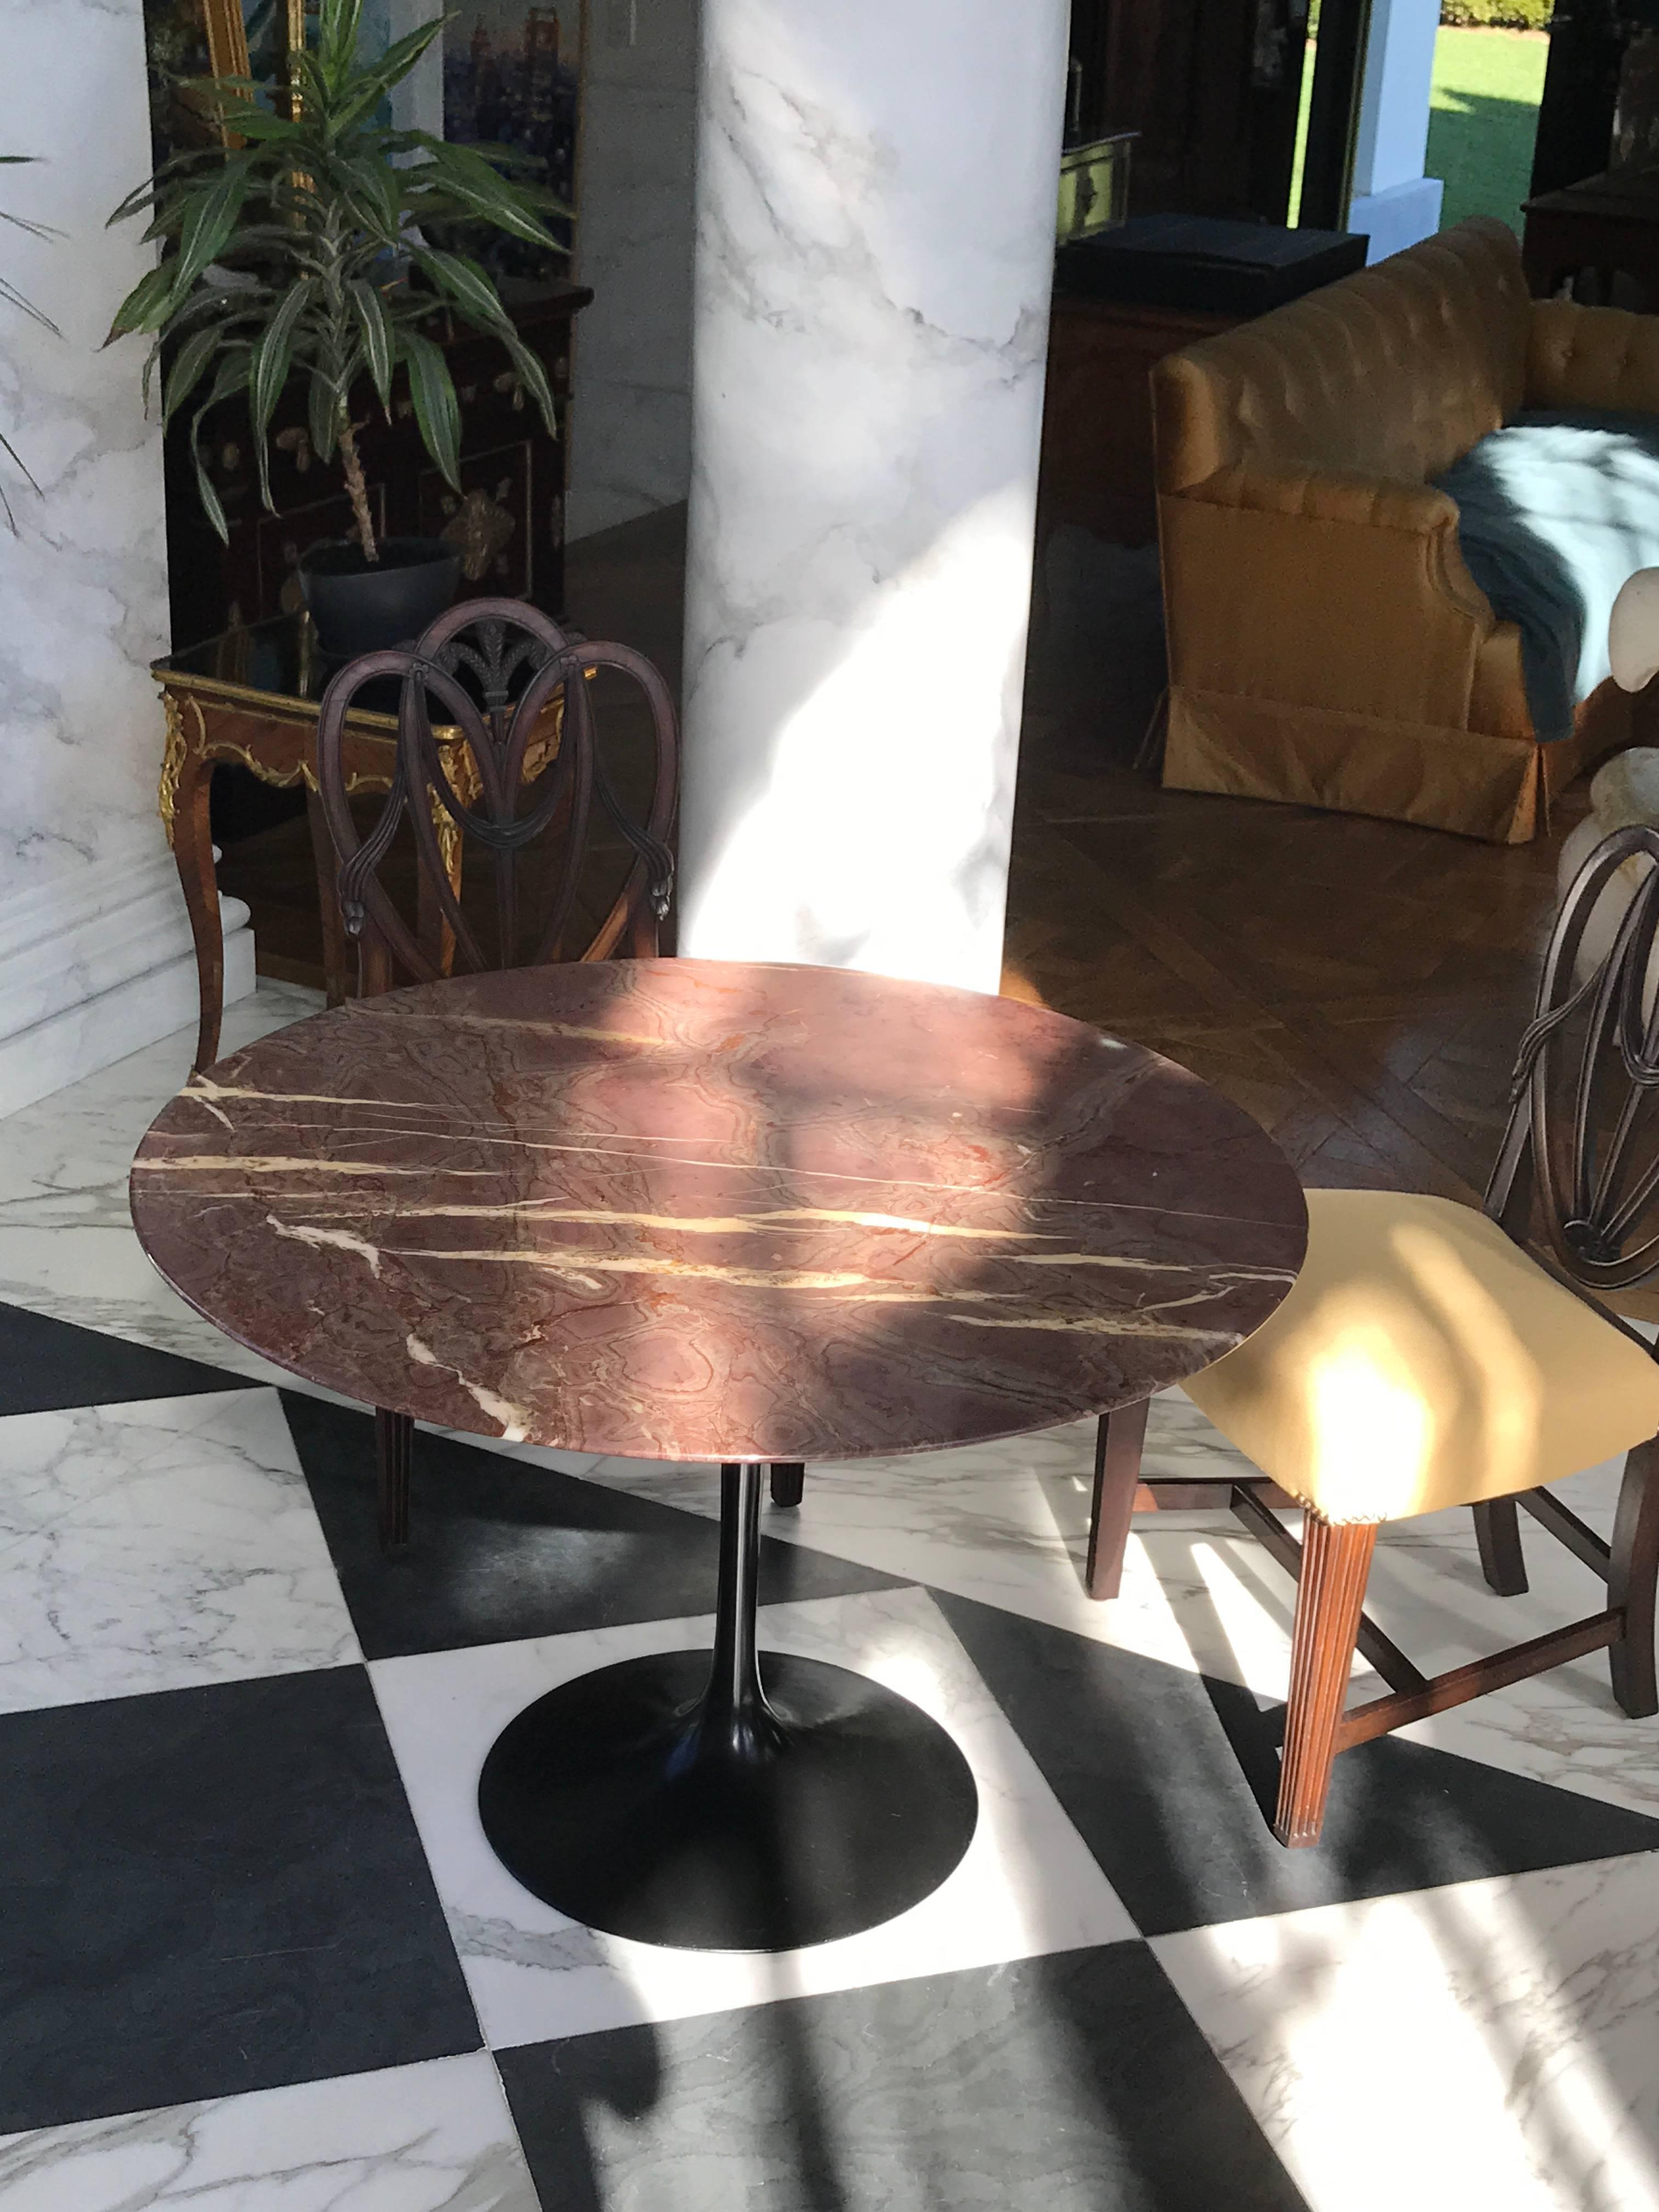 A wonderful Eero Saarinen marble-top dining table with tulip shaped black base. 
The Classic Mid Century Modern design of this table is to this day one of the most iconic designs of Knoll International. The red marble top and the black tulip base